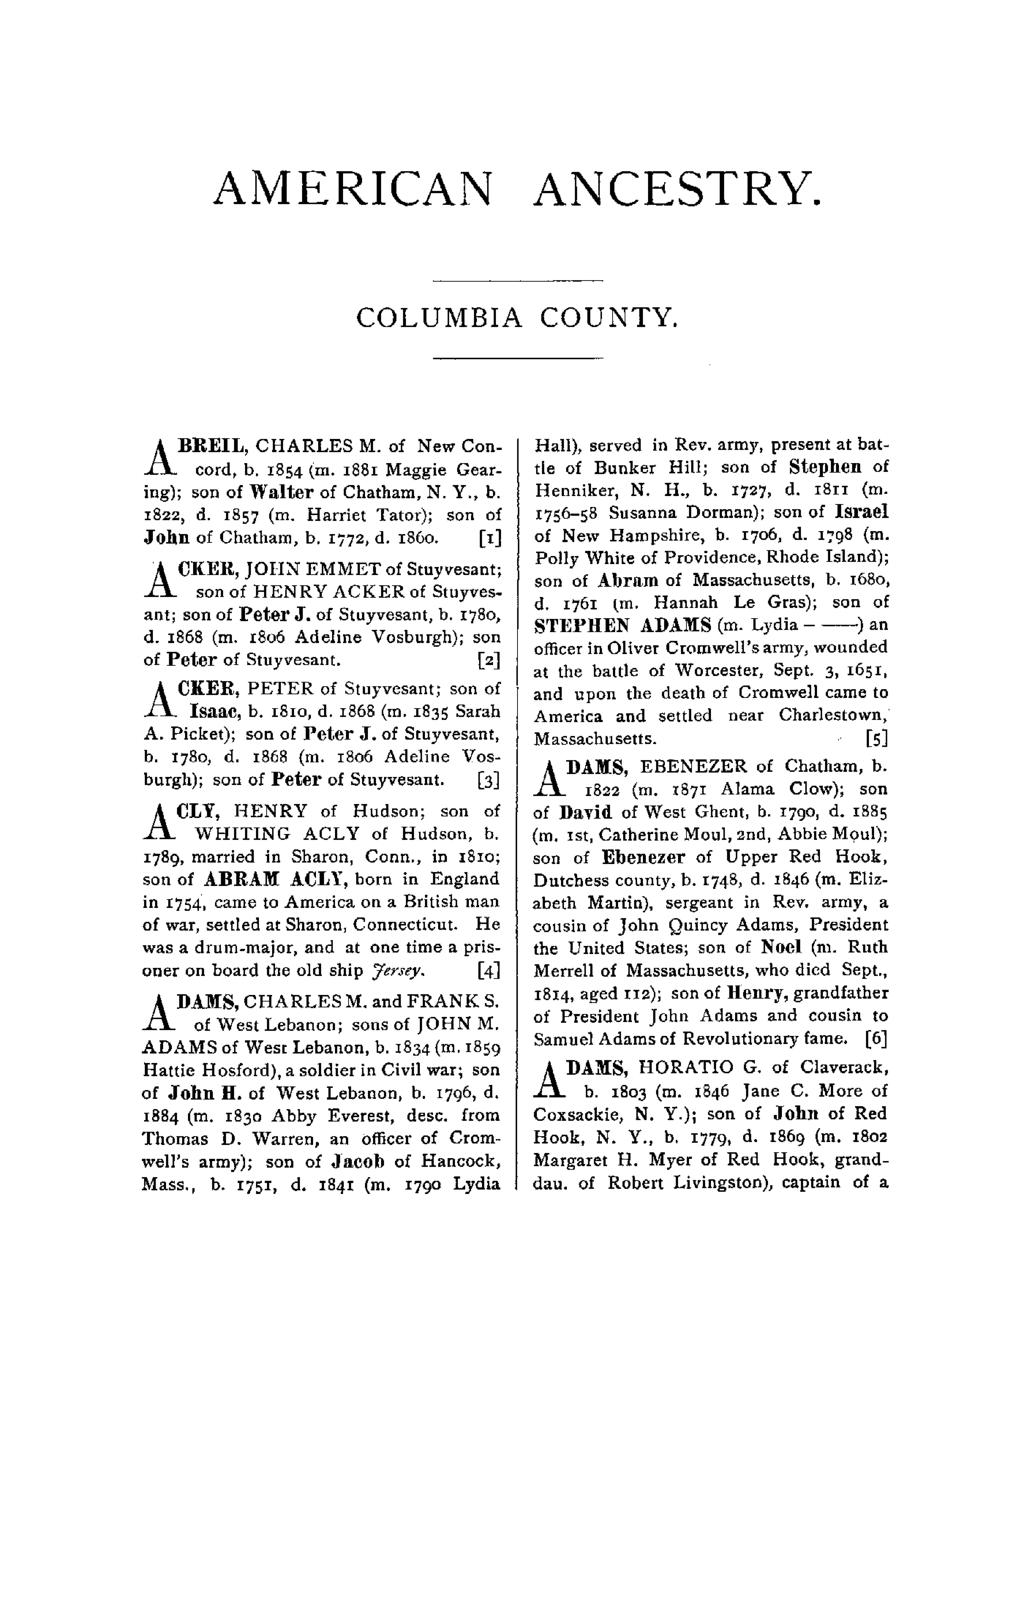 AMERICAN ANCESTRY. COLUMBIA COUNTY. ABREIL, CHARLES M. of New Concord, b. 1854 (m. 1881 Maggie Gearing); son of Walter of Chatham, N. Y., b. 1822, d. 1857 (m.